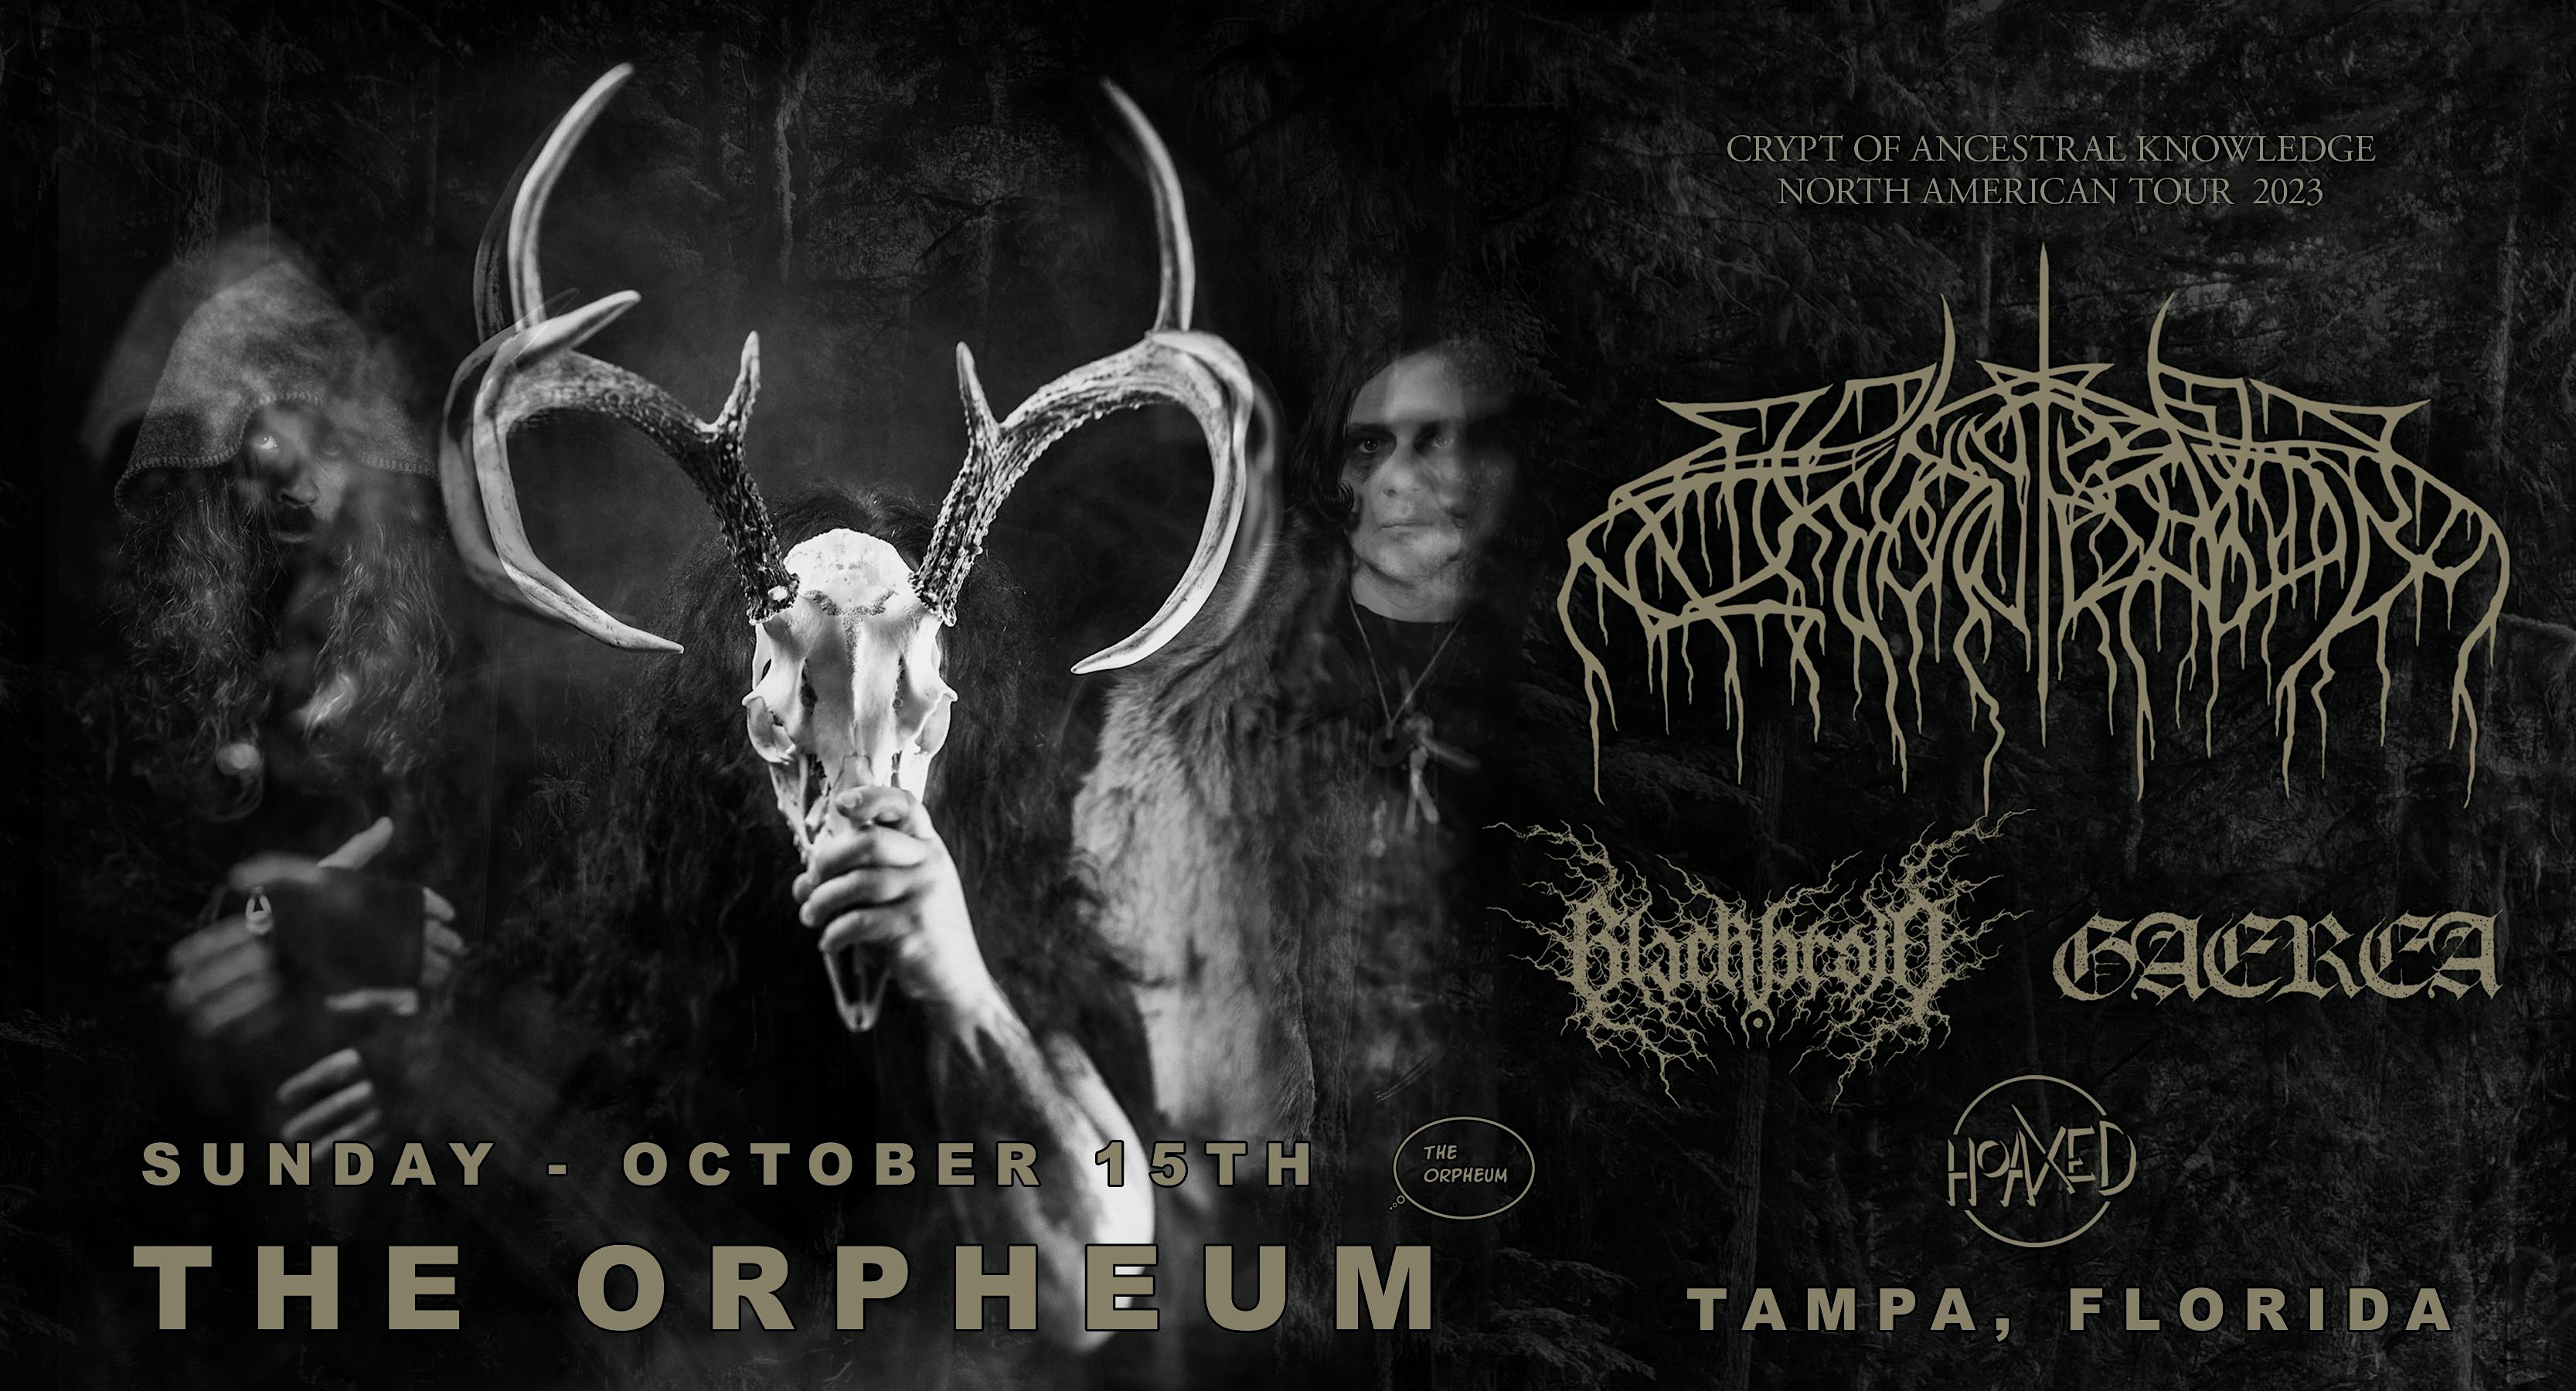 Wolves in the Throne Room, Blackbraid, Gaerea, and Hoaxed in Tampa at the Orpheum